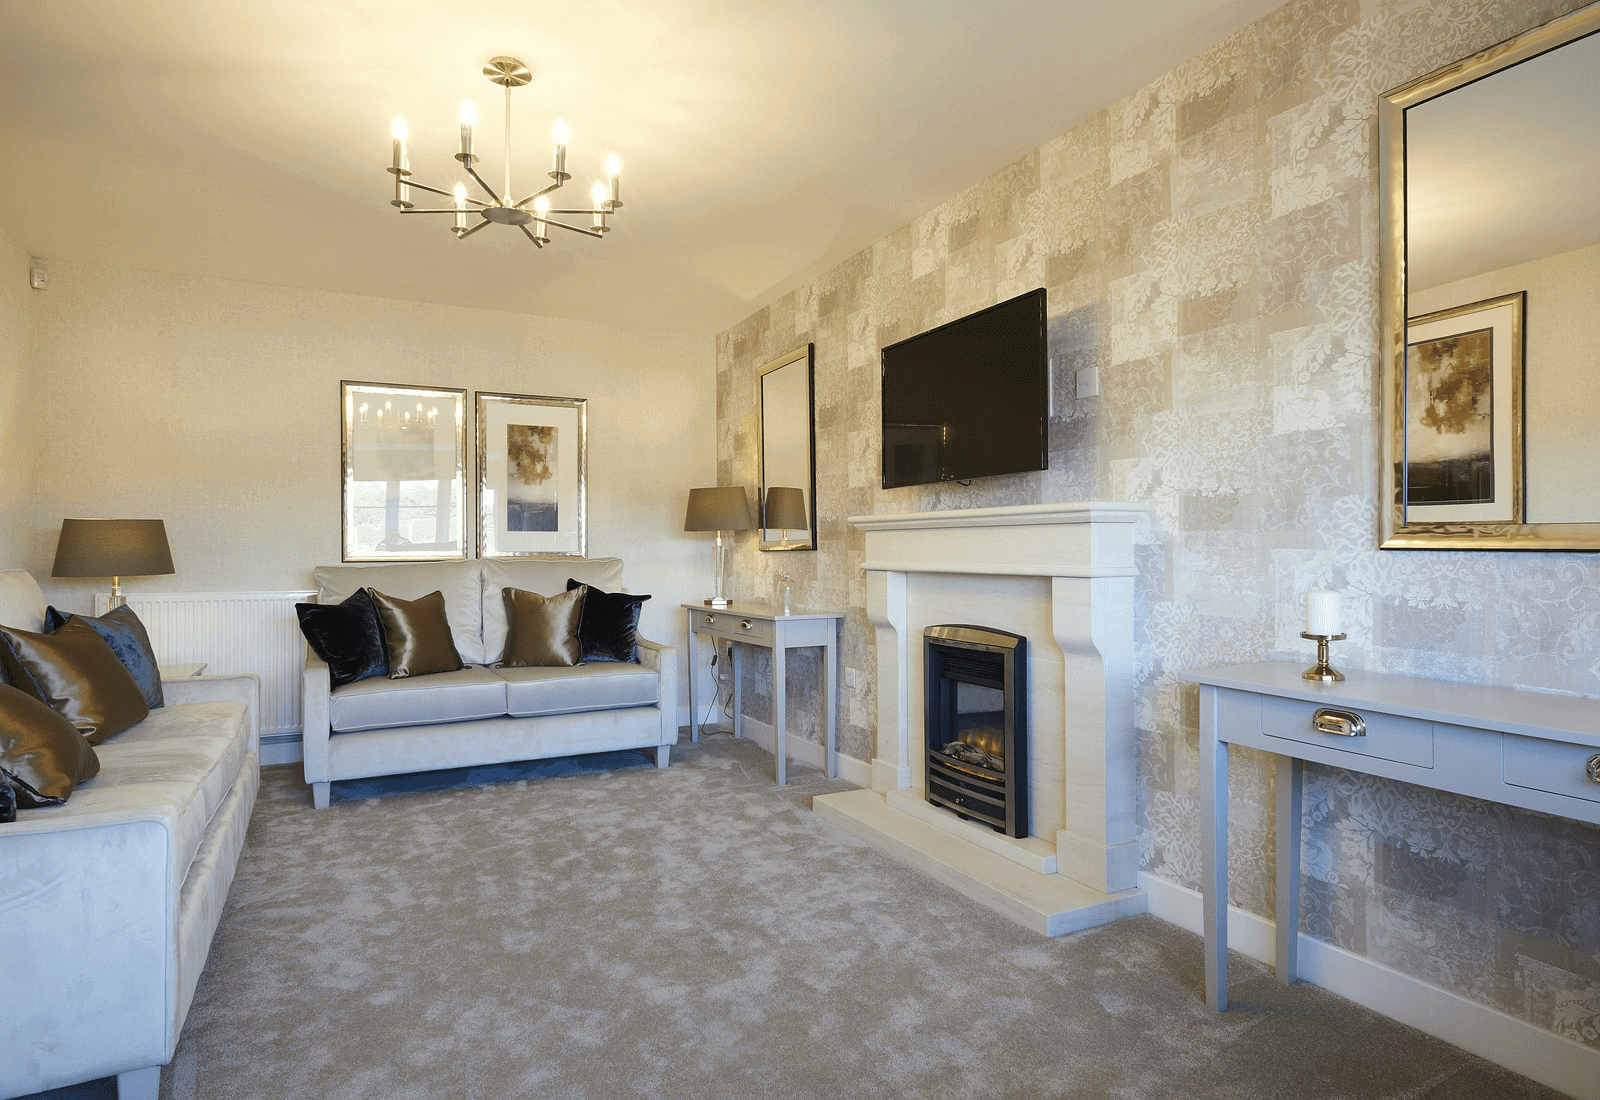 Living Room in a Banbury Show Home